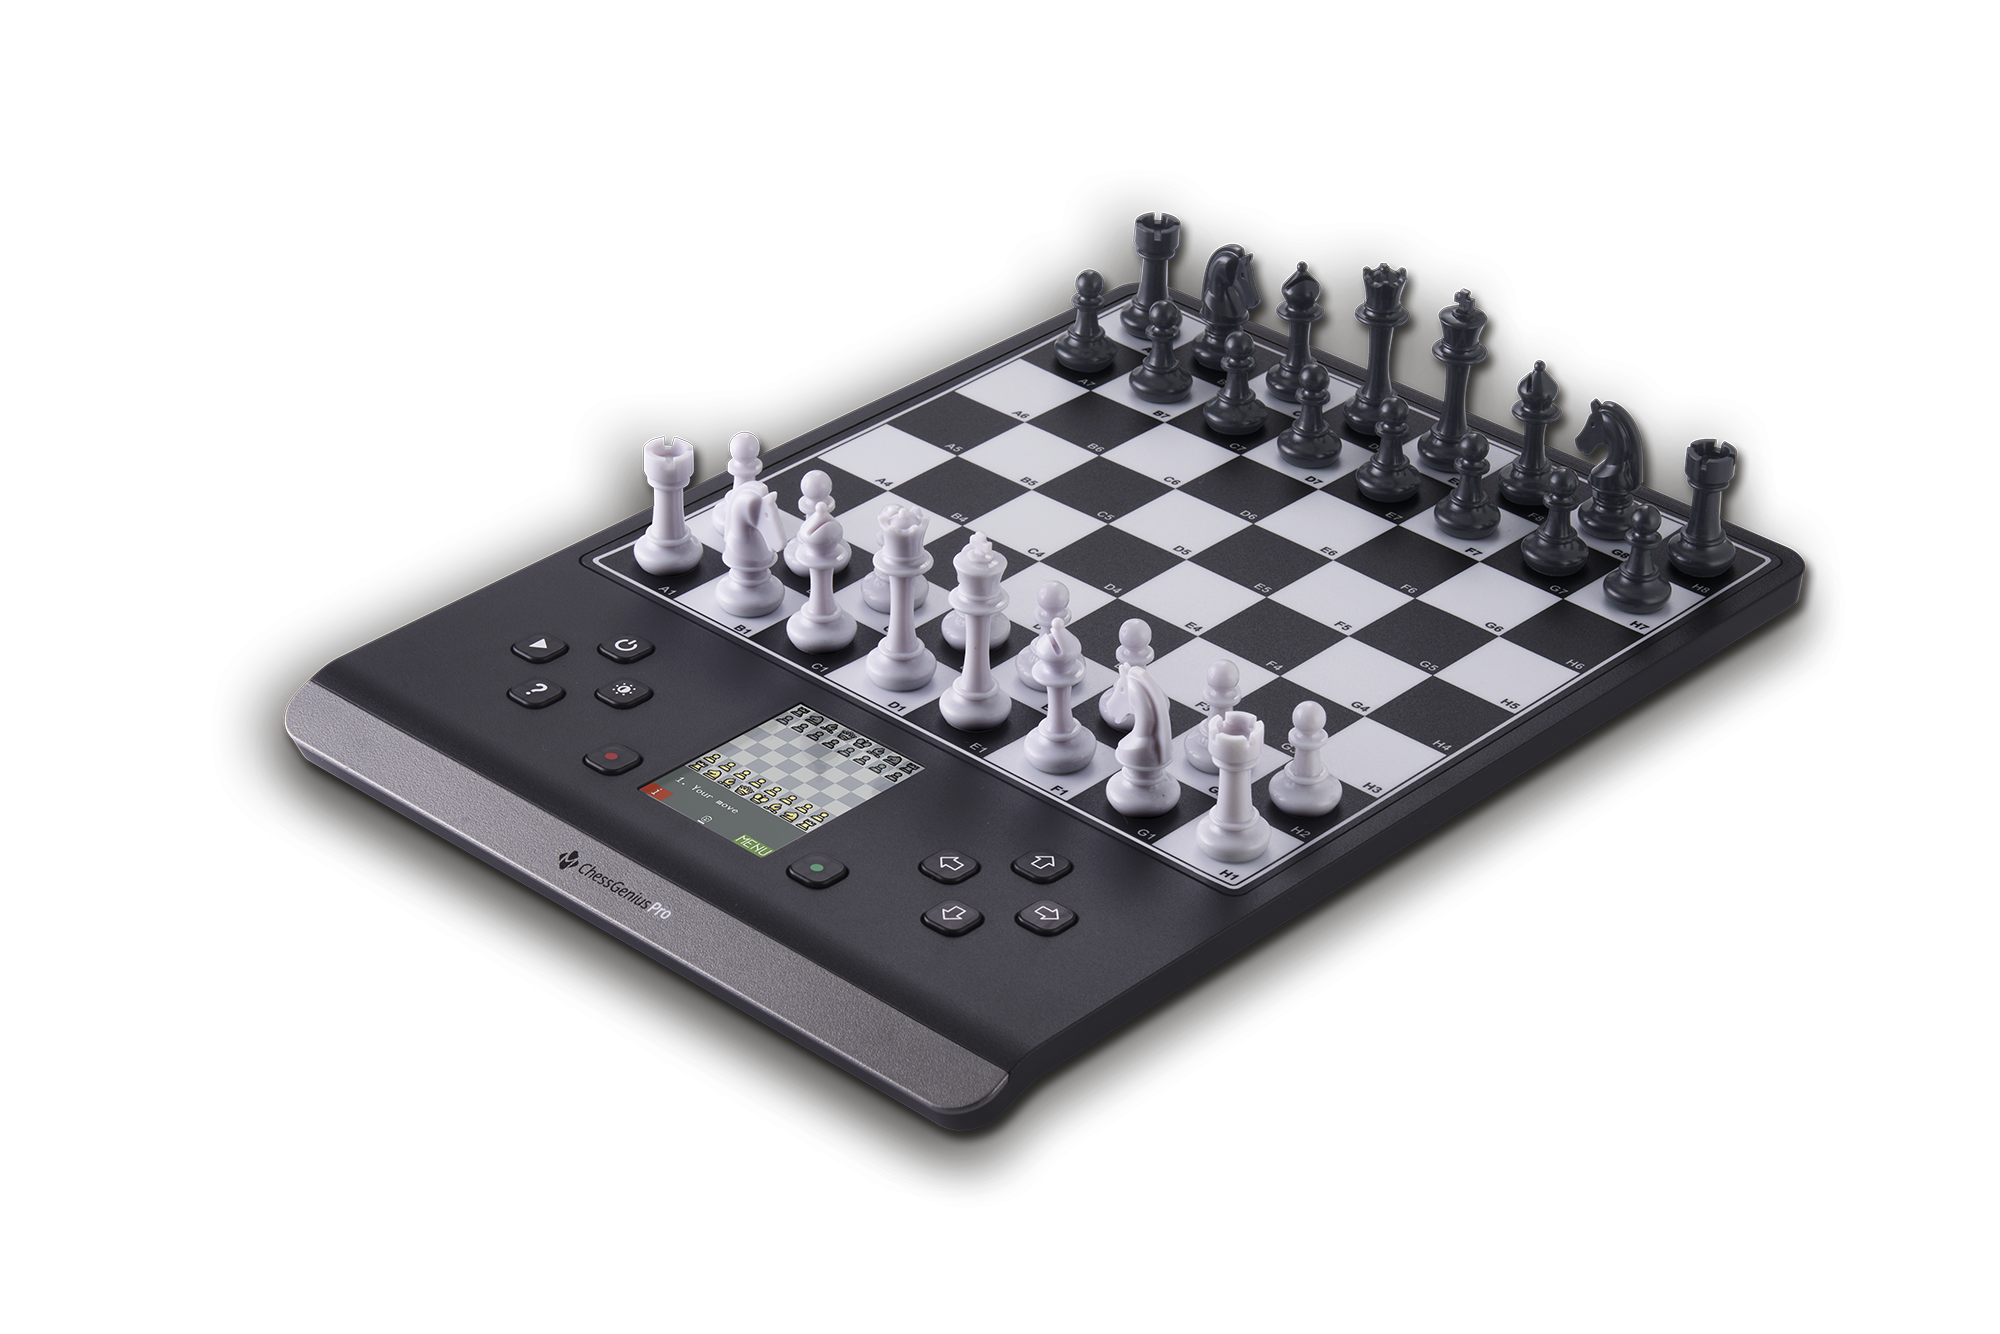 MILLENNIUM Digital Chess on real Boards